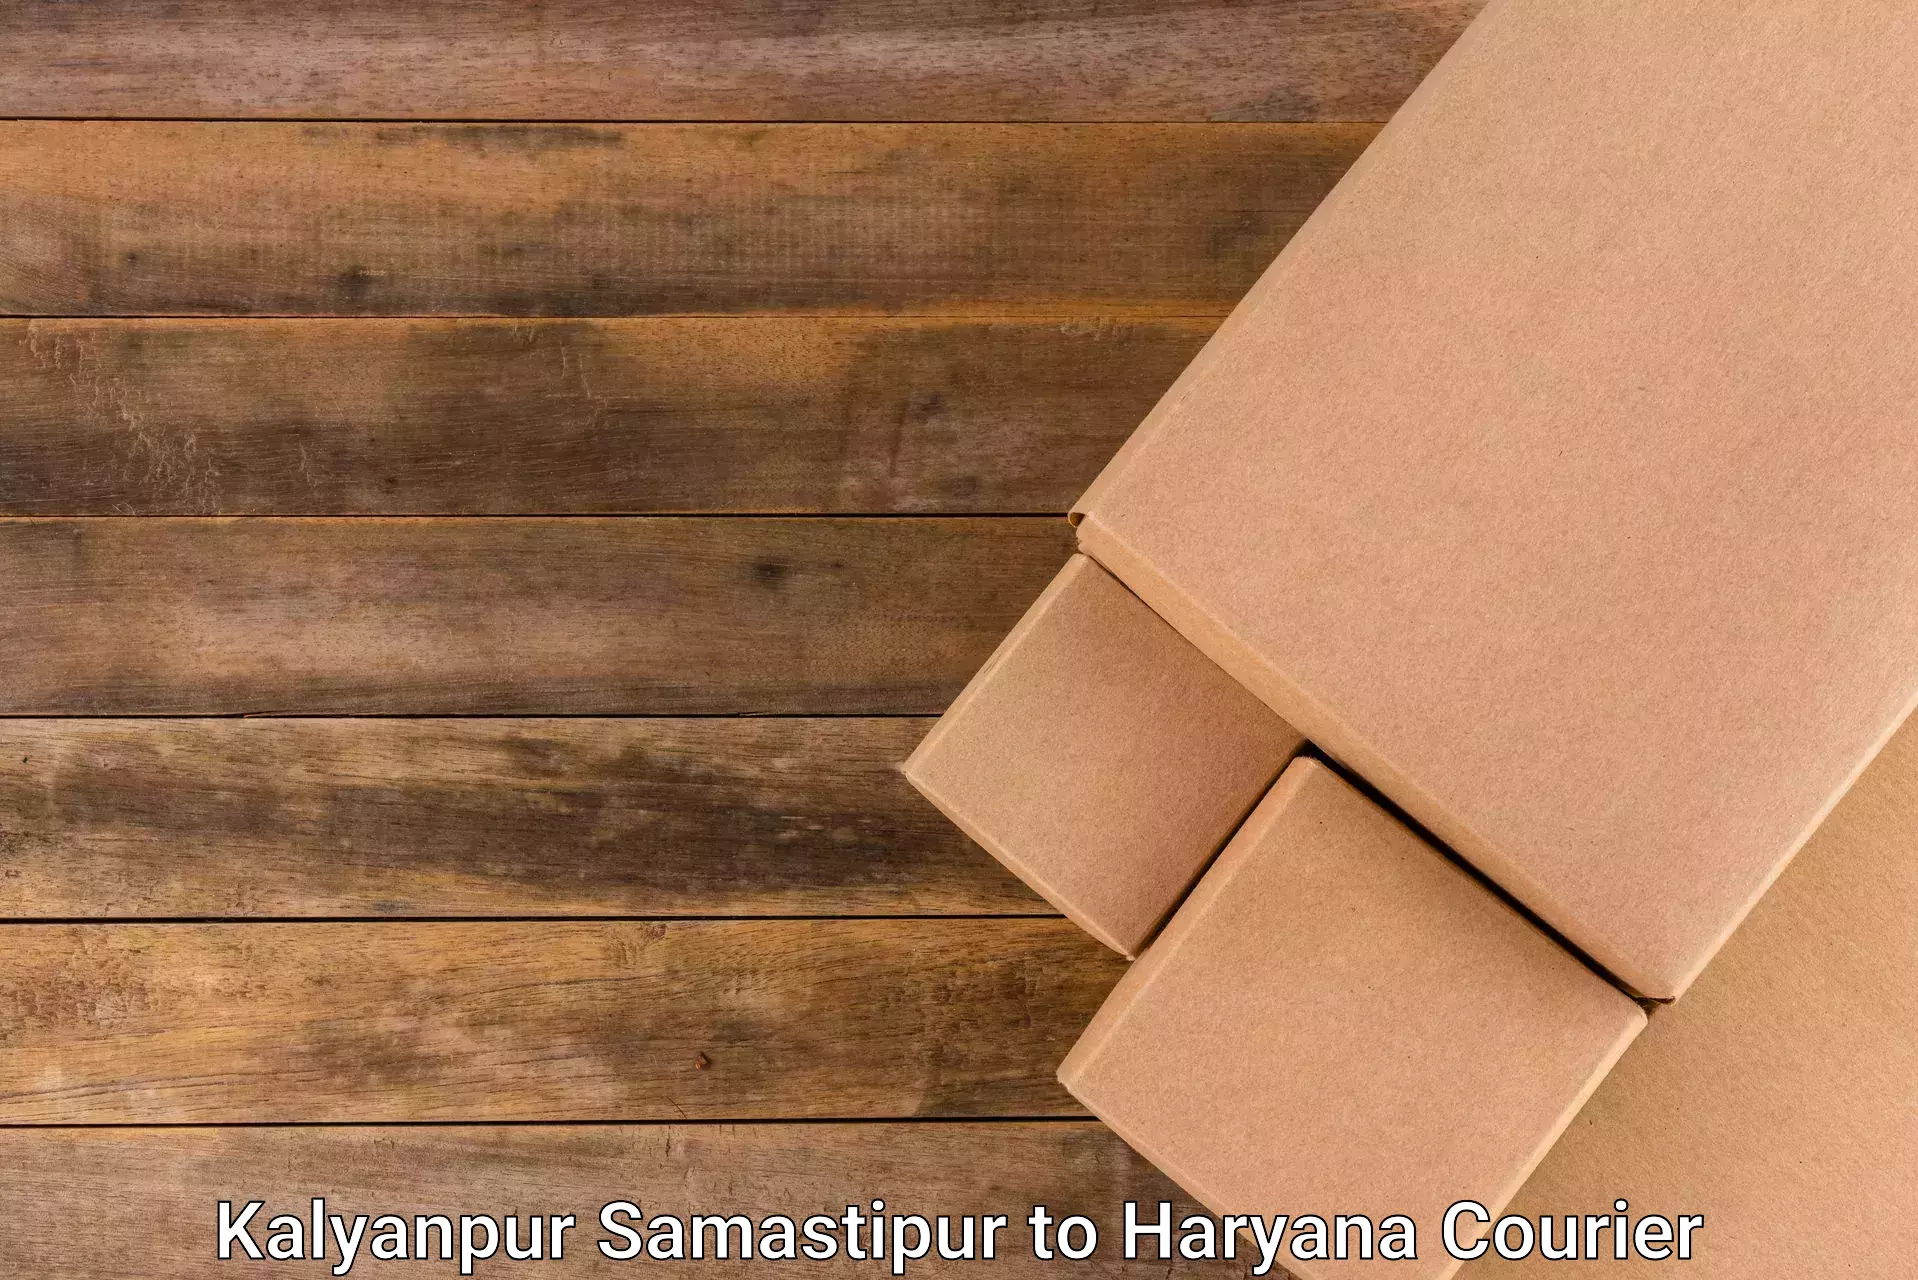 High-speed parcel service in Kalyanpur Samastipur to Bahal